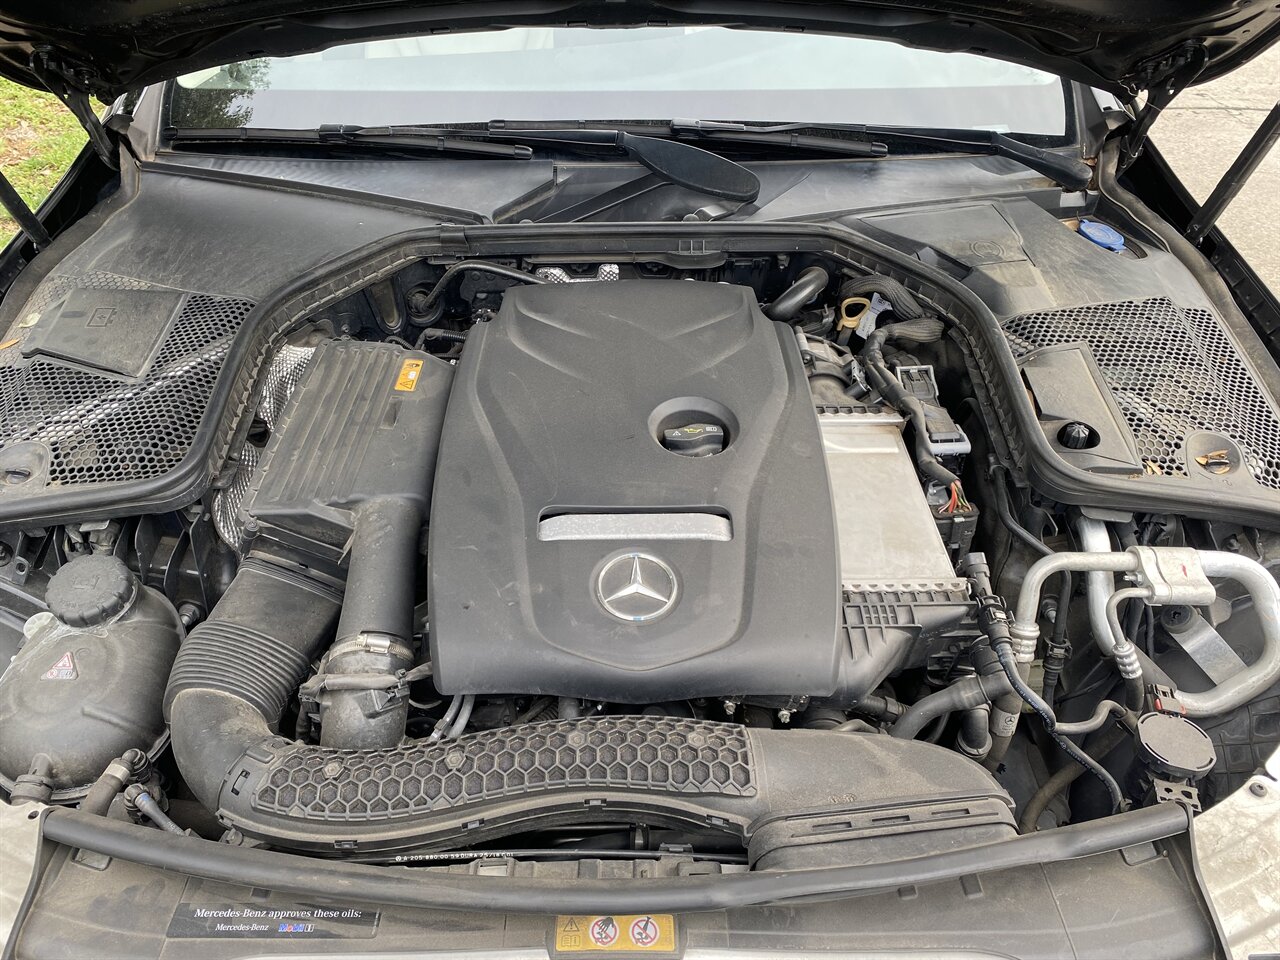 2018 Mercedes-Benz C 300 LEATHER ROOF NAVI HEATED SEATS ONLY 61K MLS   - Photo 46 - Houston, TX 77031